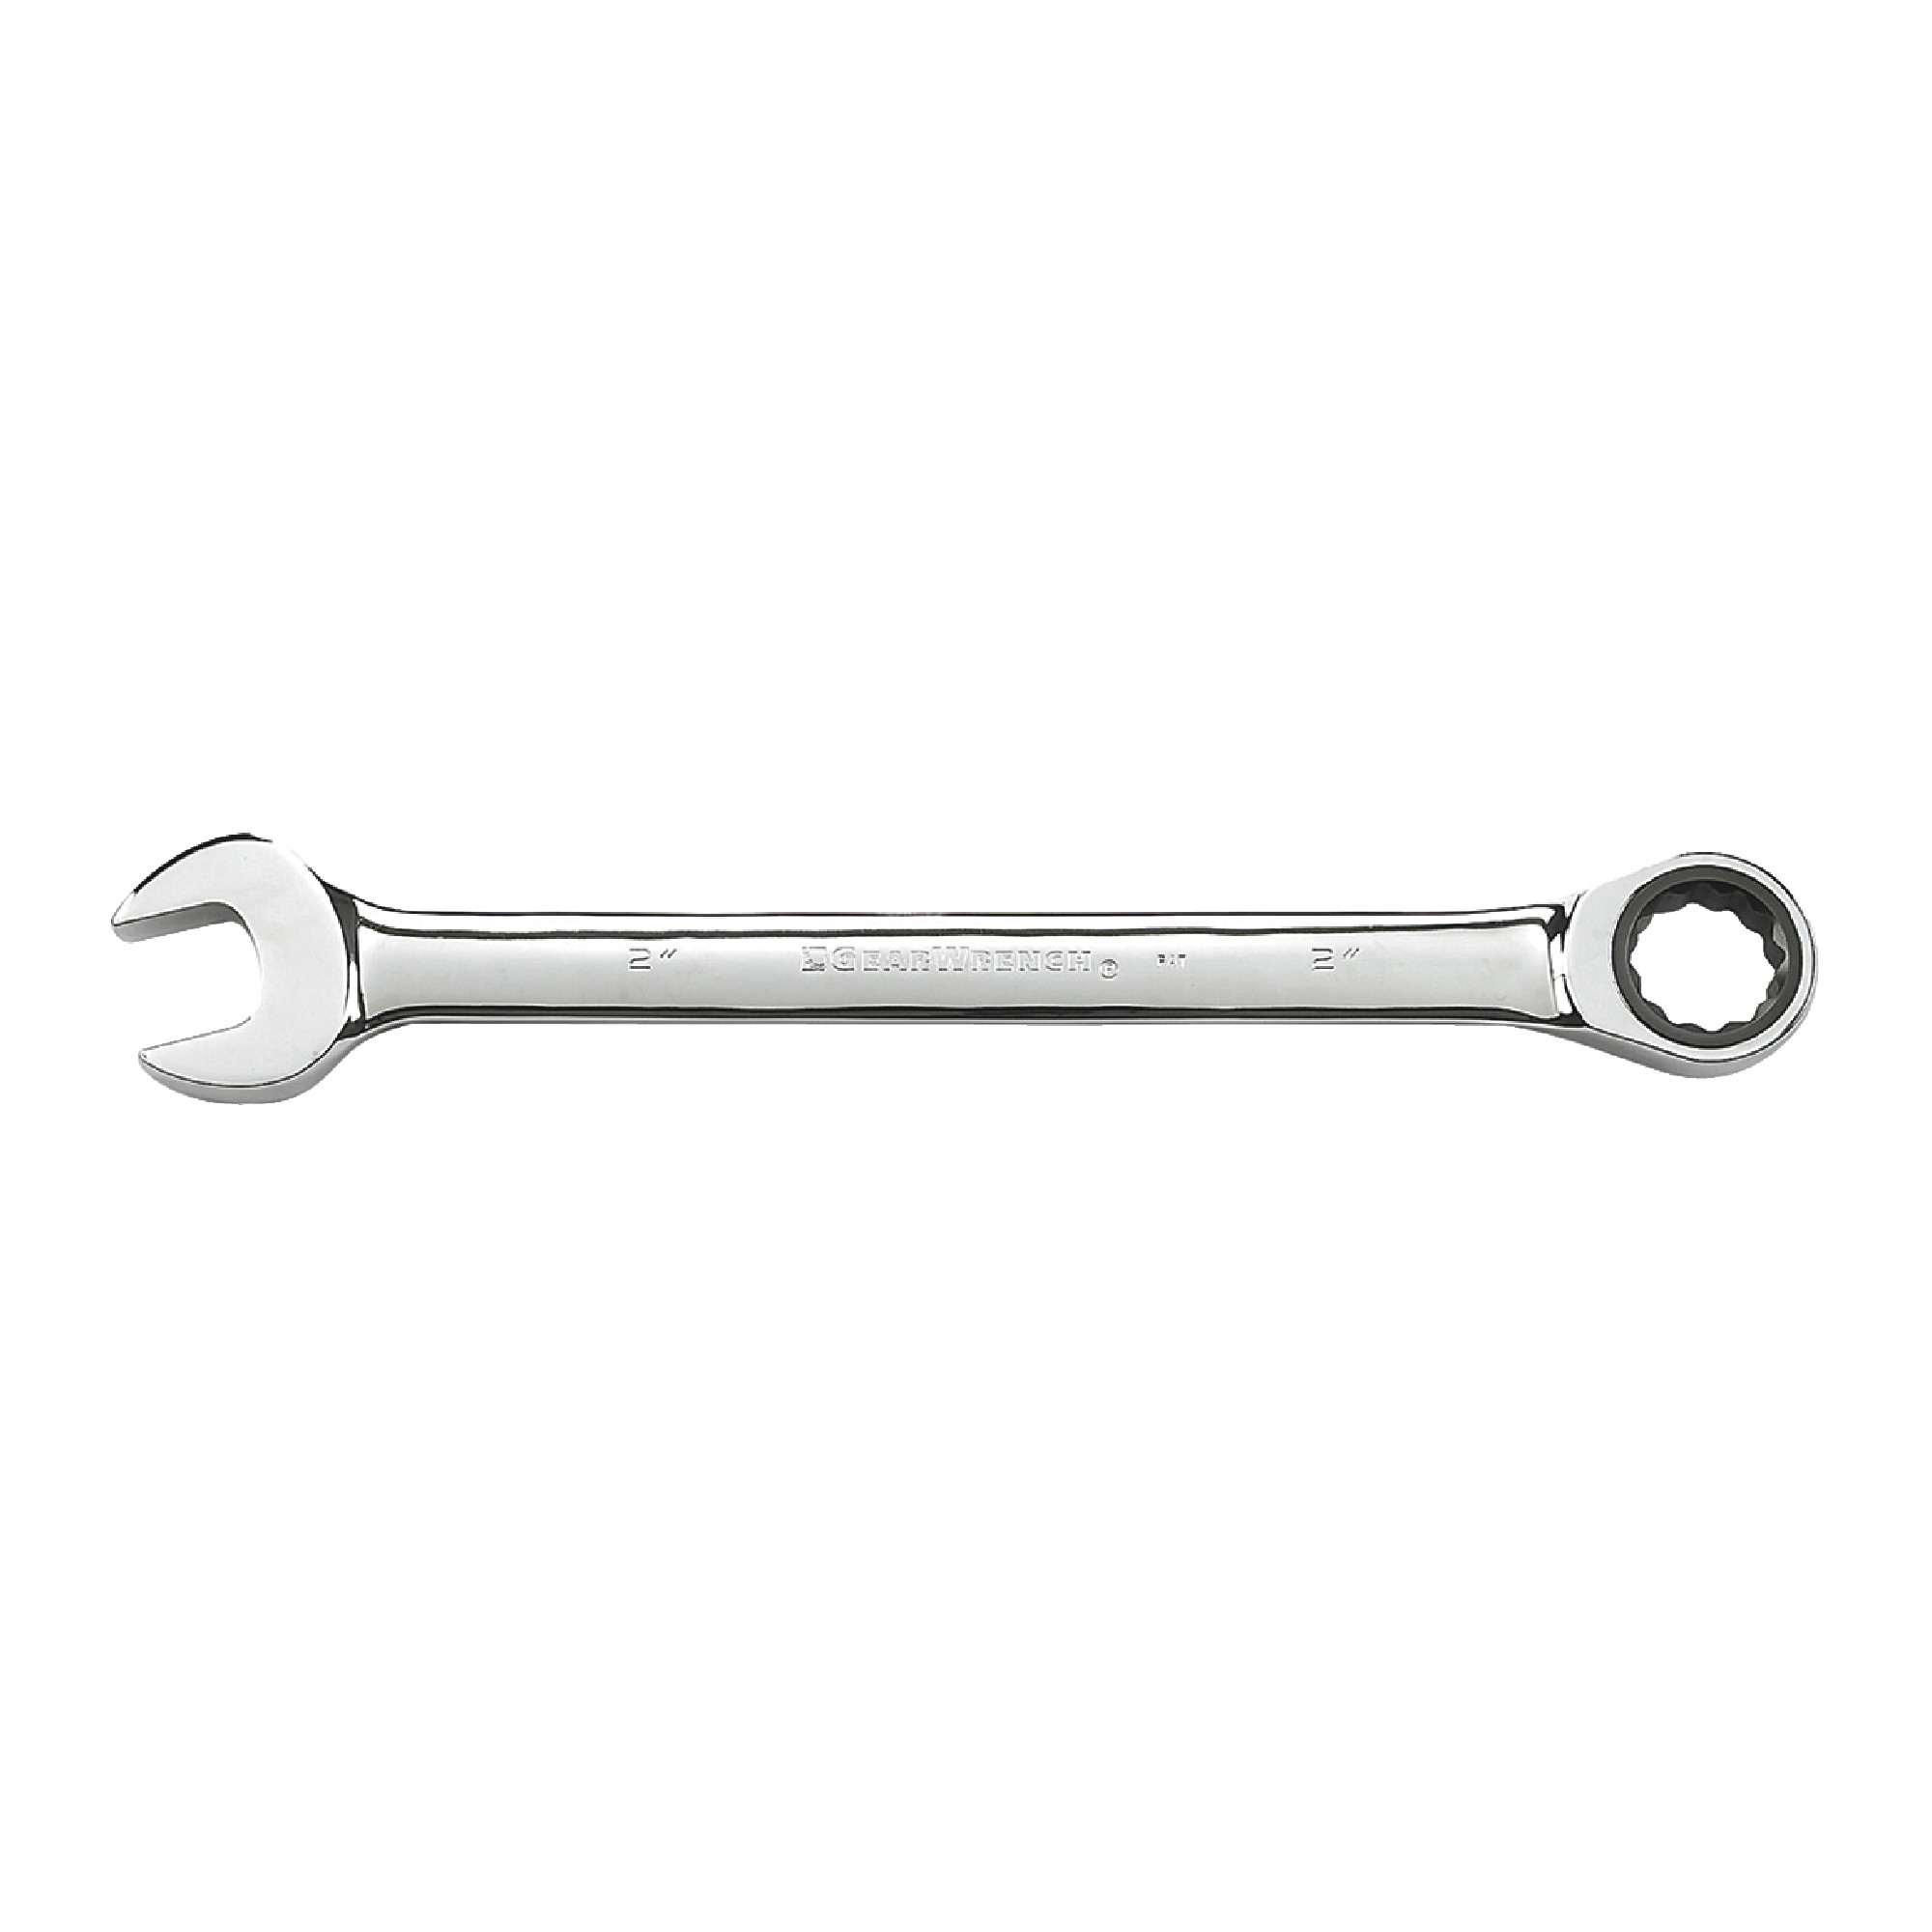 2" 12 Point Jumbo Ratcheting Combination Wrench